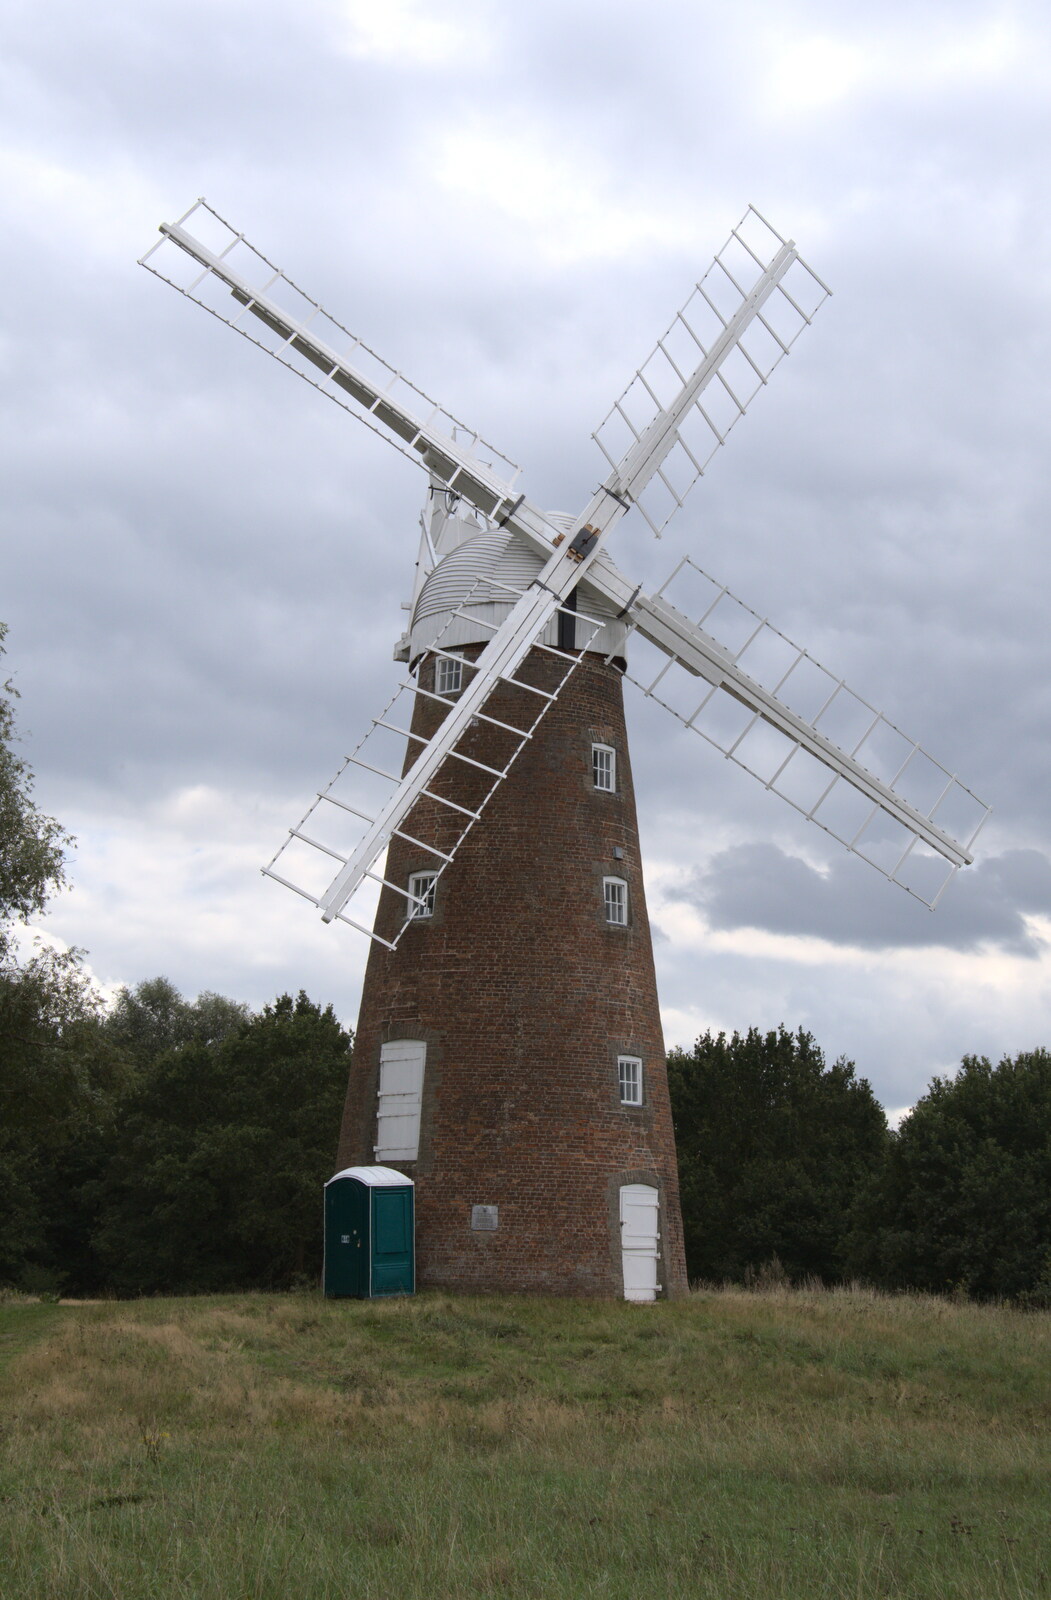 Billingford Windmill is now full re-sailed from Camping at Three Rivers, Geldeston, Norfolk - 5th September 2020